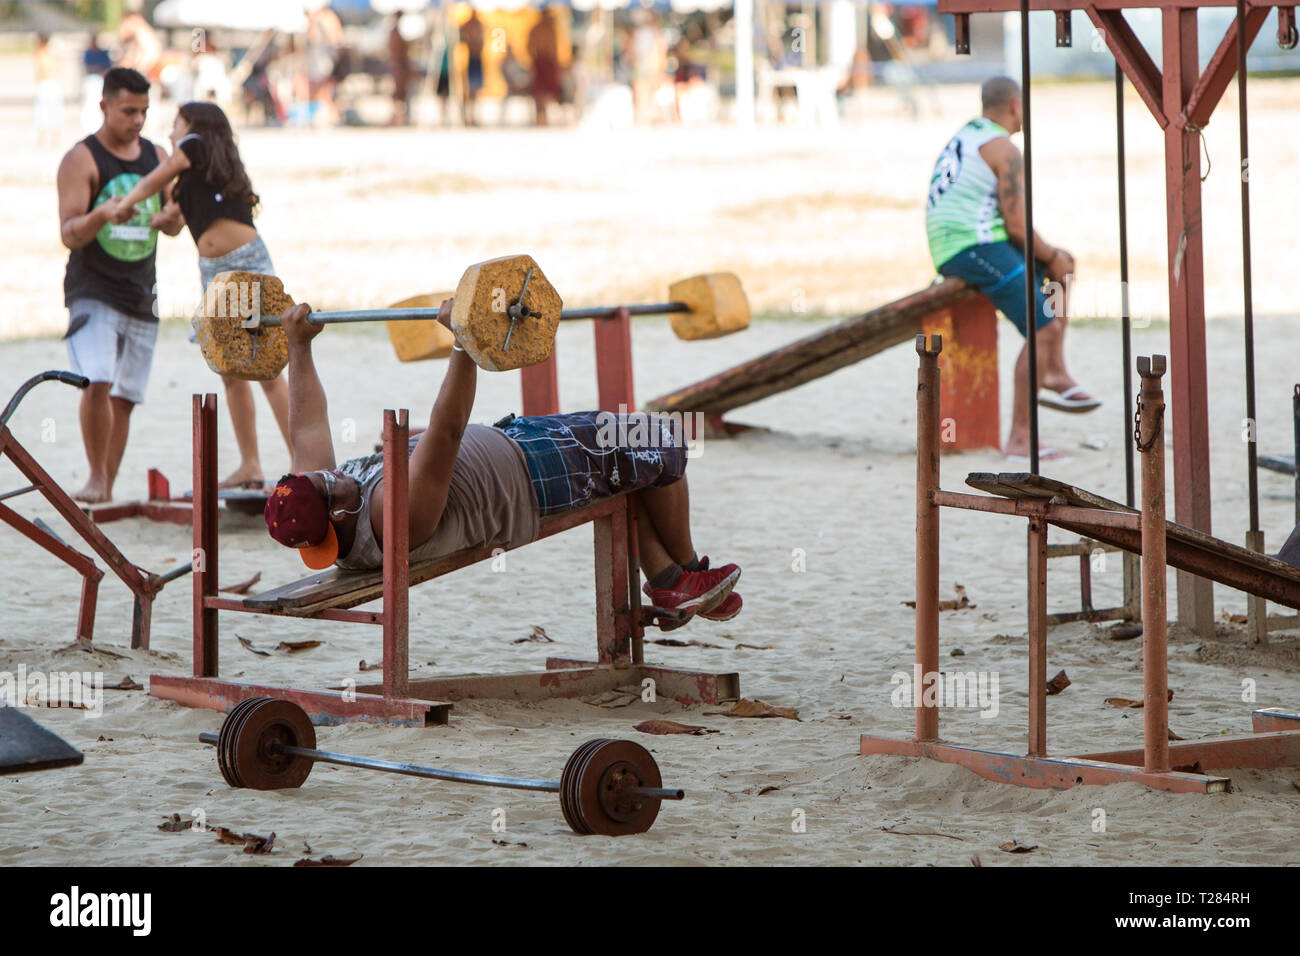 A man works out doing bench press with crude weightlifting equipment in an outdoor gym on a public beach on July 8, 2018 in Sao Vicente, Brazil. Stock Photo